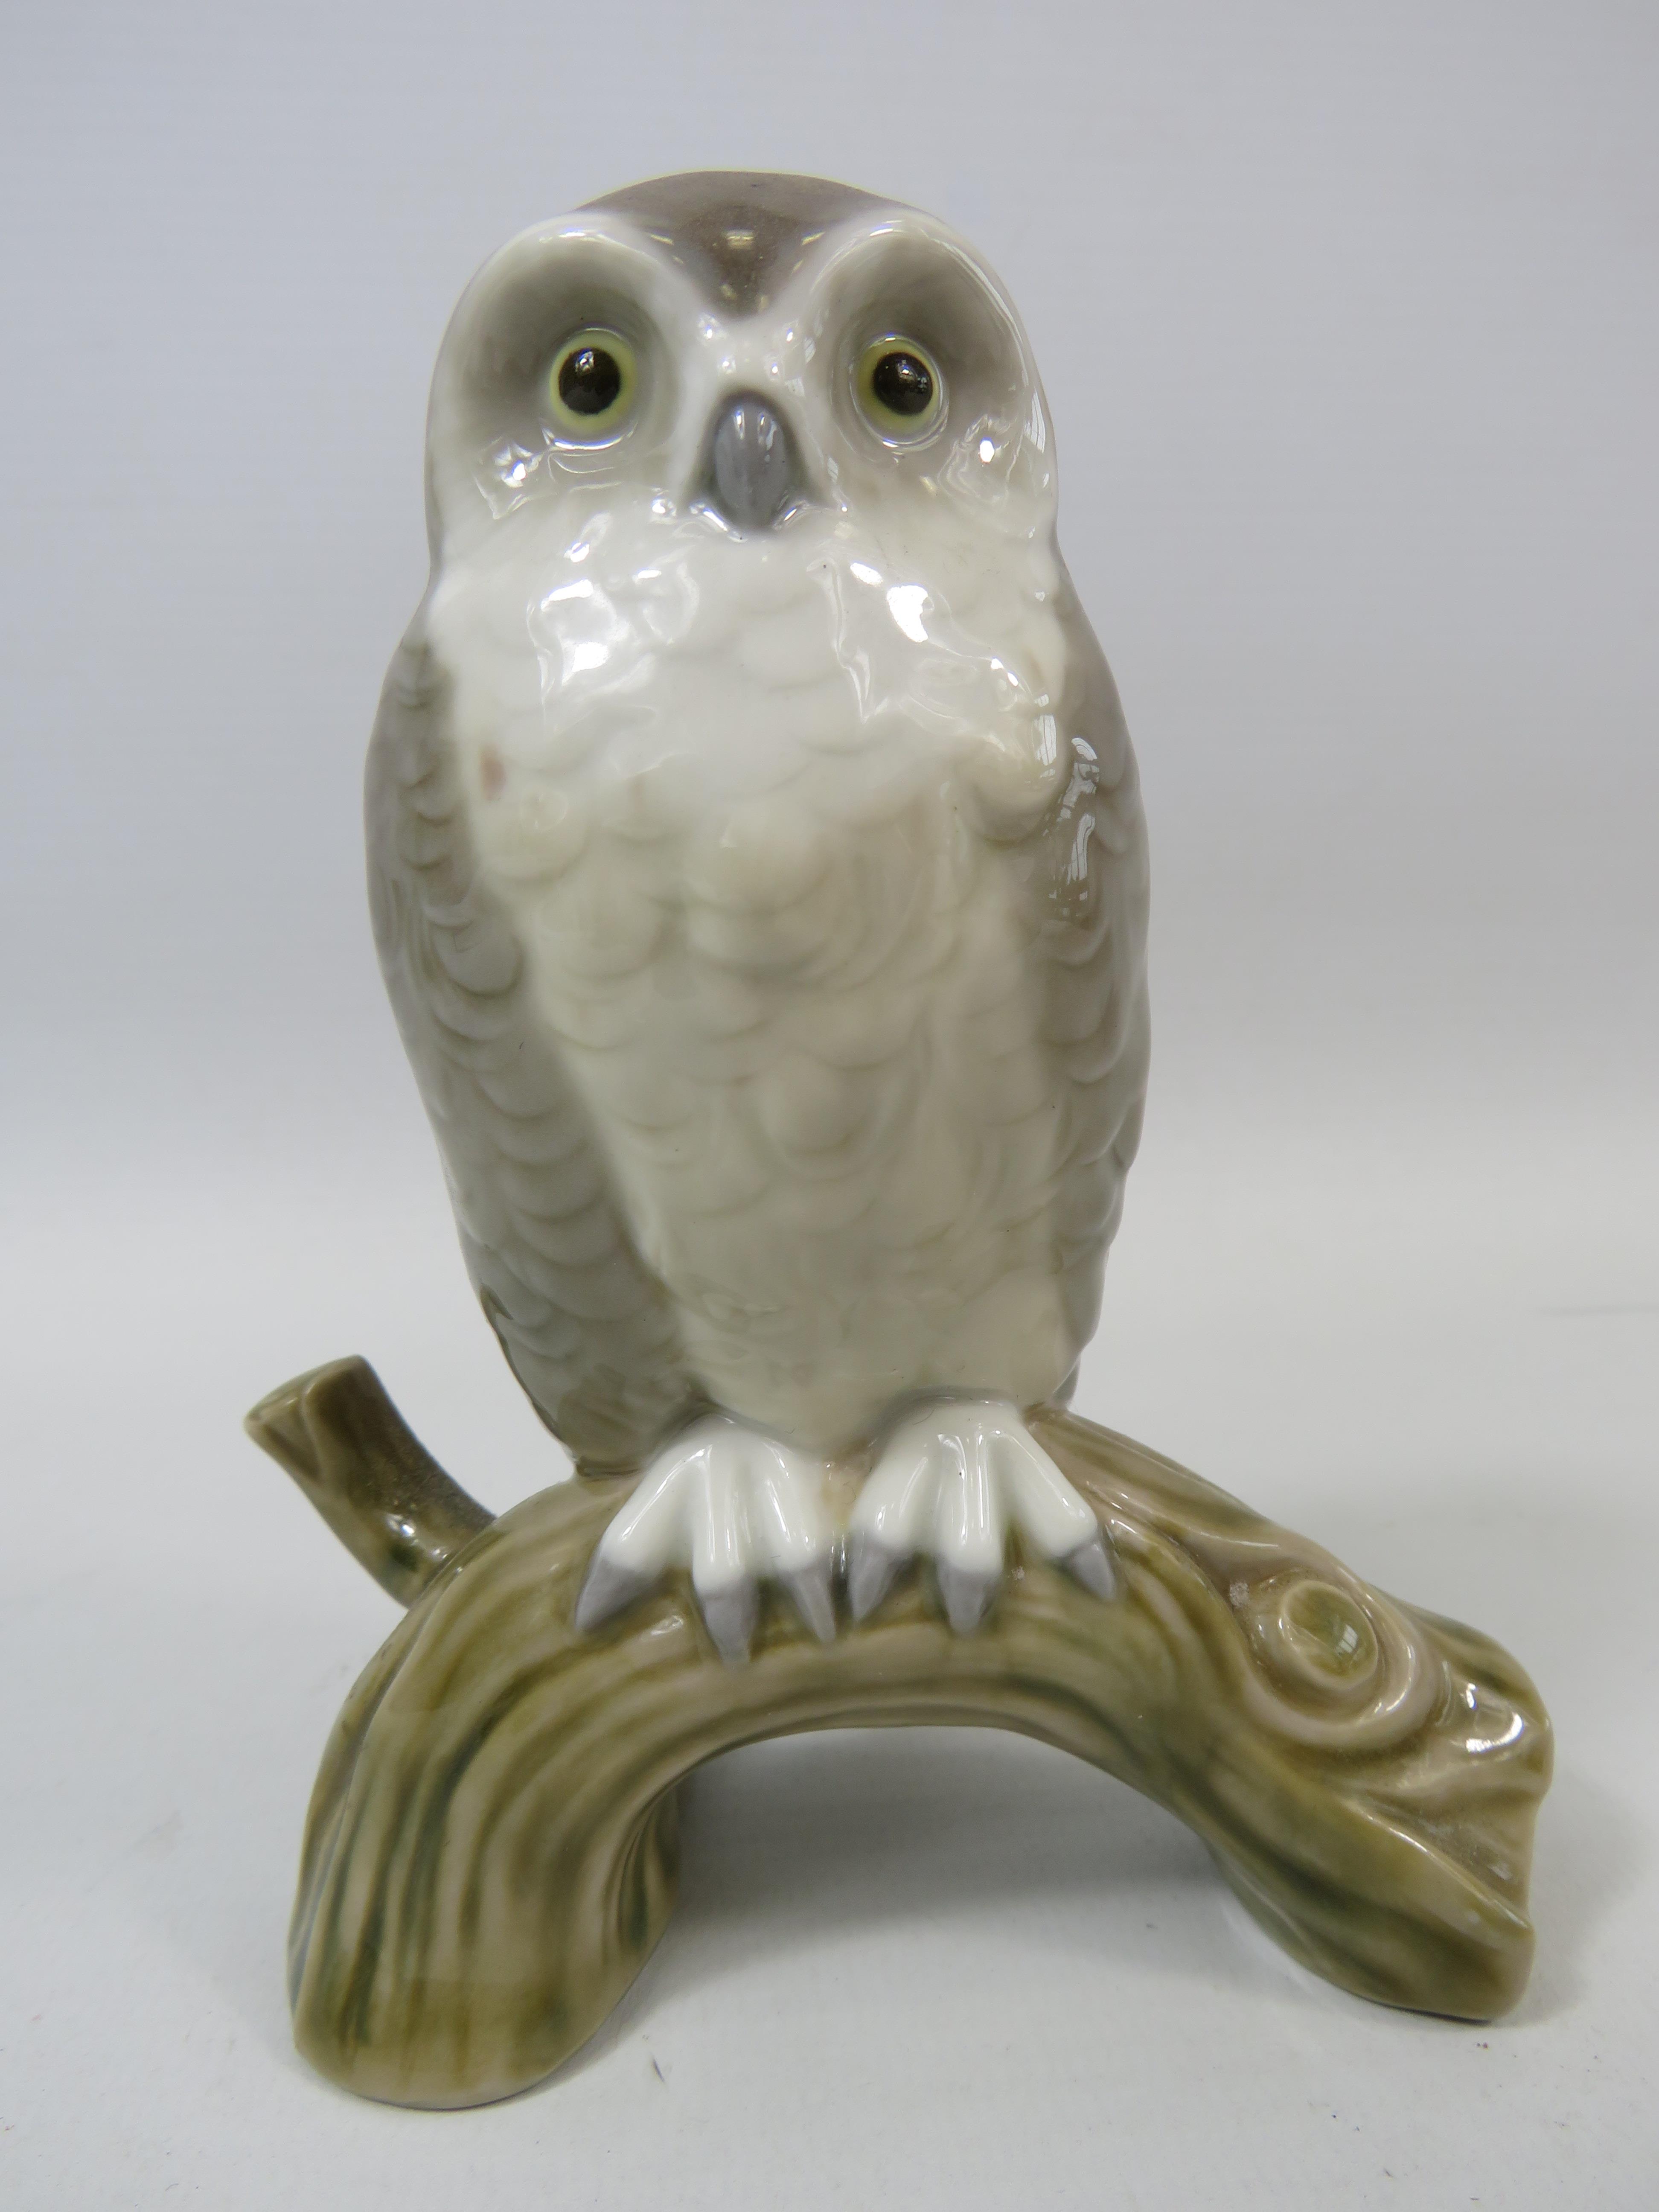 Lladro Owl standing on a branch figurine, approx 12cm Tall